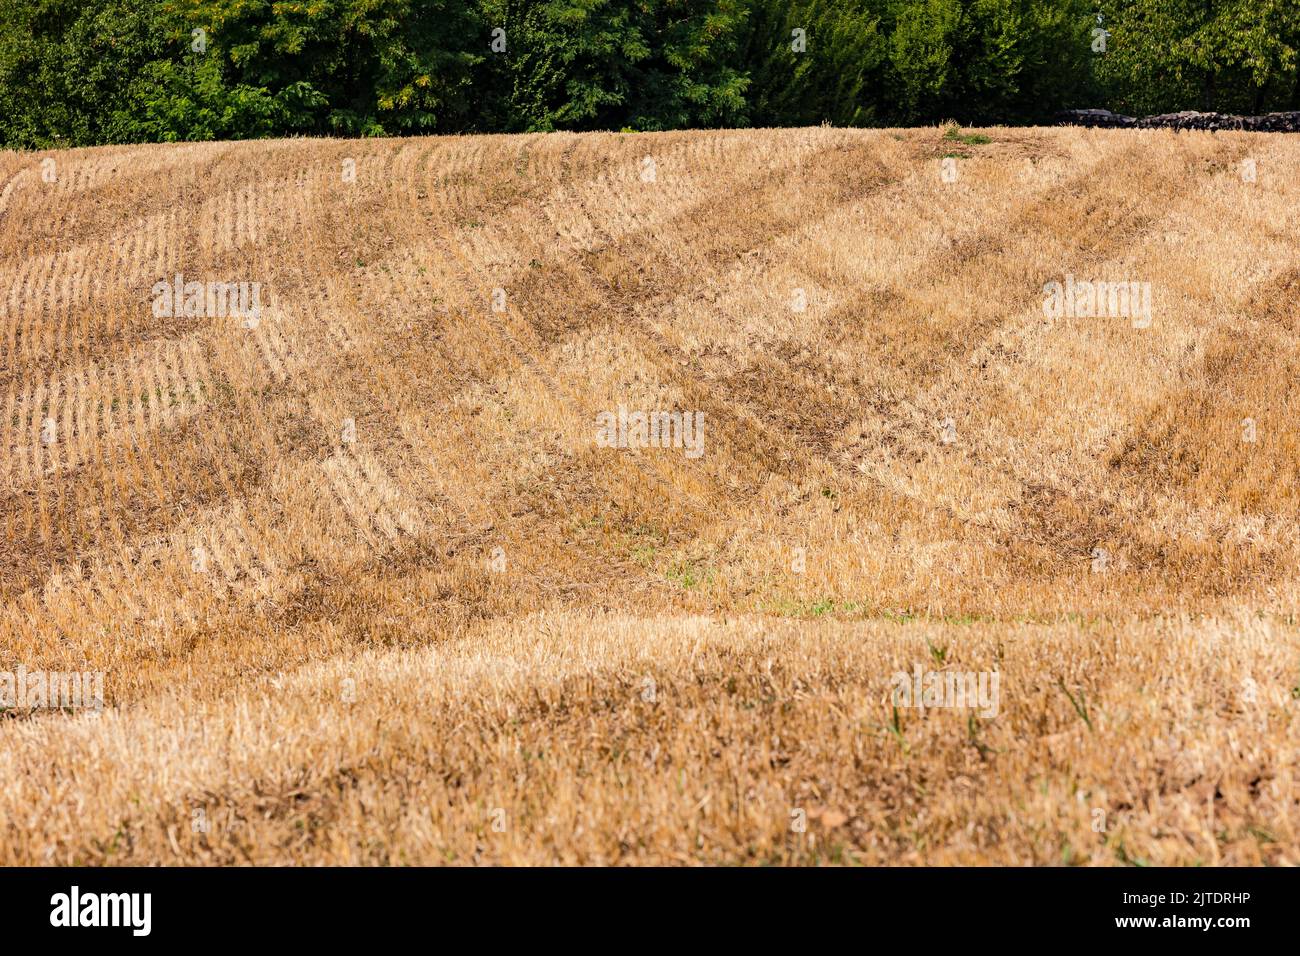 A harvested corn field on a slope with geometric stripes and lines, Germany Stock Photo